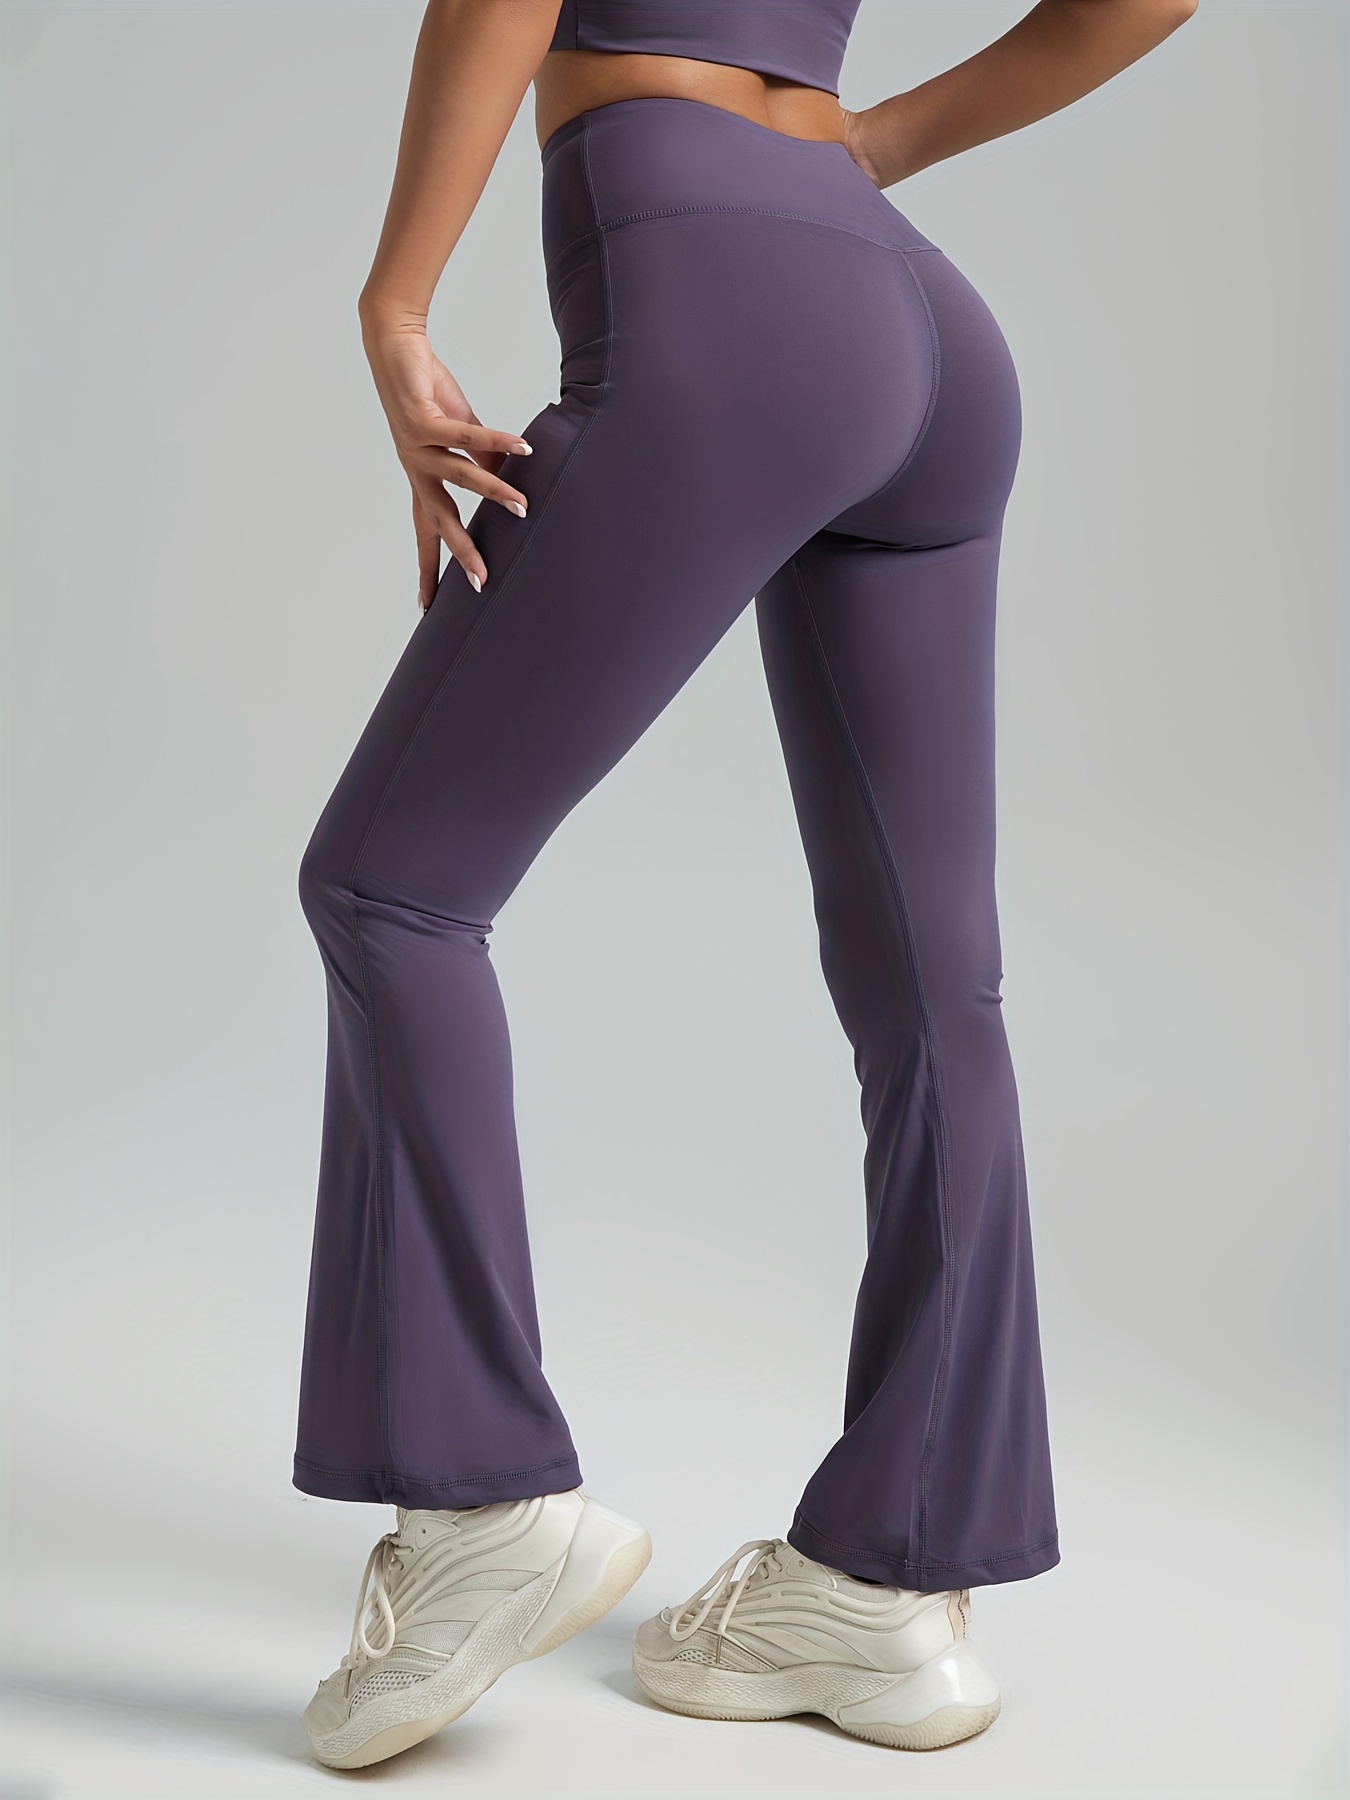 Buy High Waist Flared Yoga Pants in Plum Colour with Side Pockets